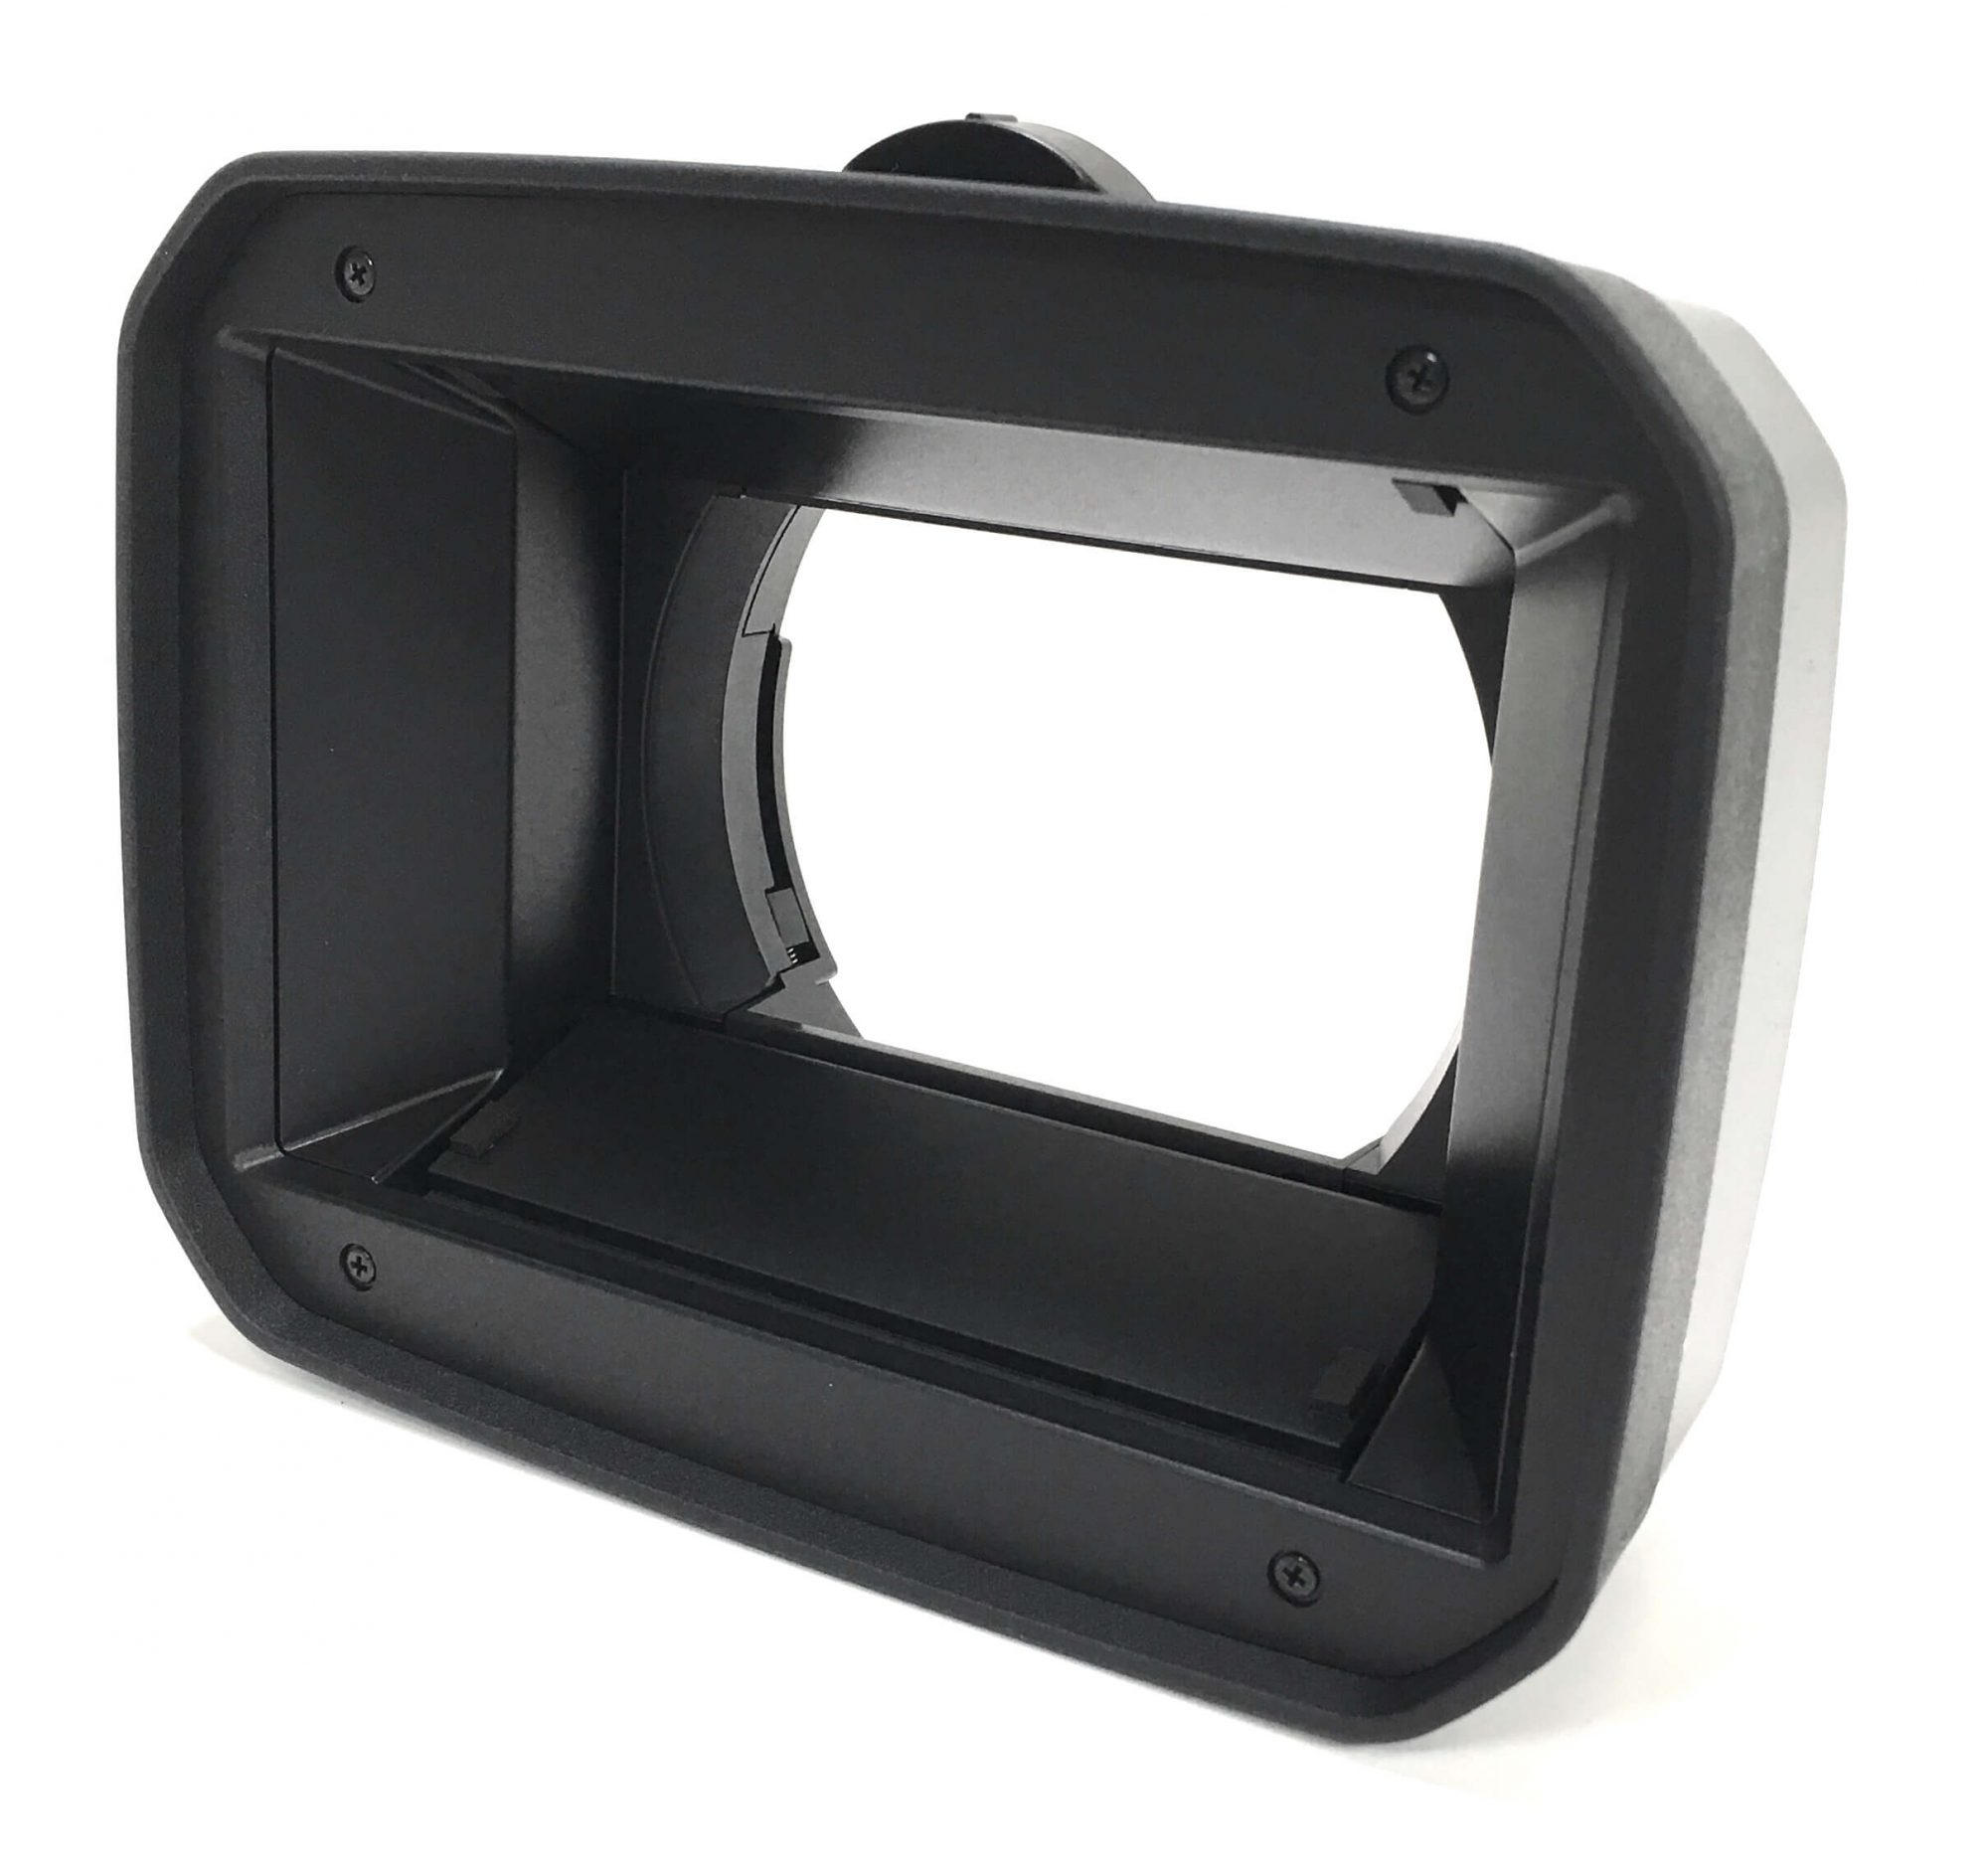 Original Lens Hood with Shutter for the Sony HVR-Z5U camcorder. It is a genuine Sony part, sourced directly from Sony USA. Brand new factory fresh. Free Shipping.